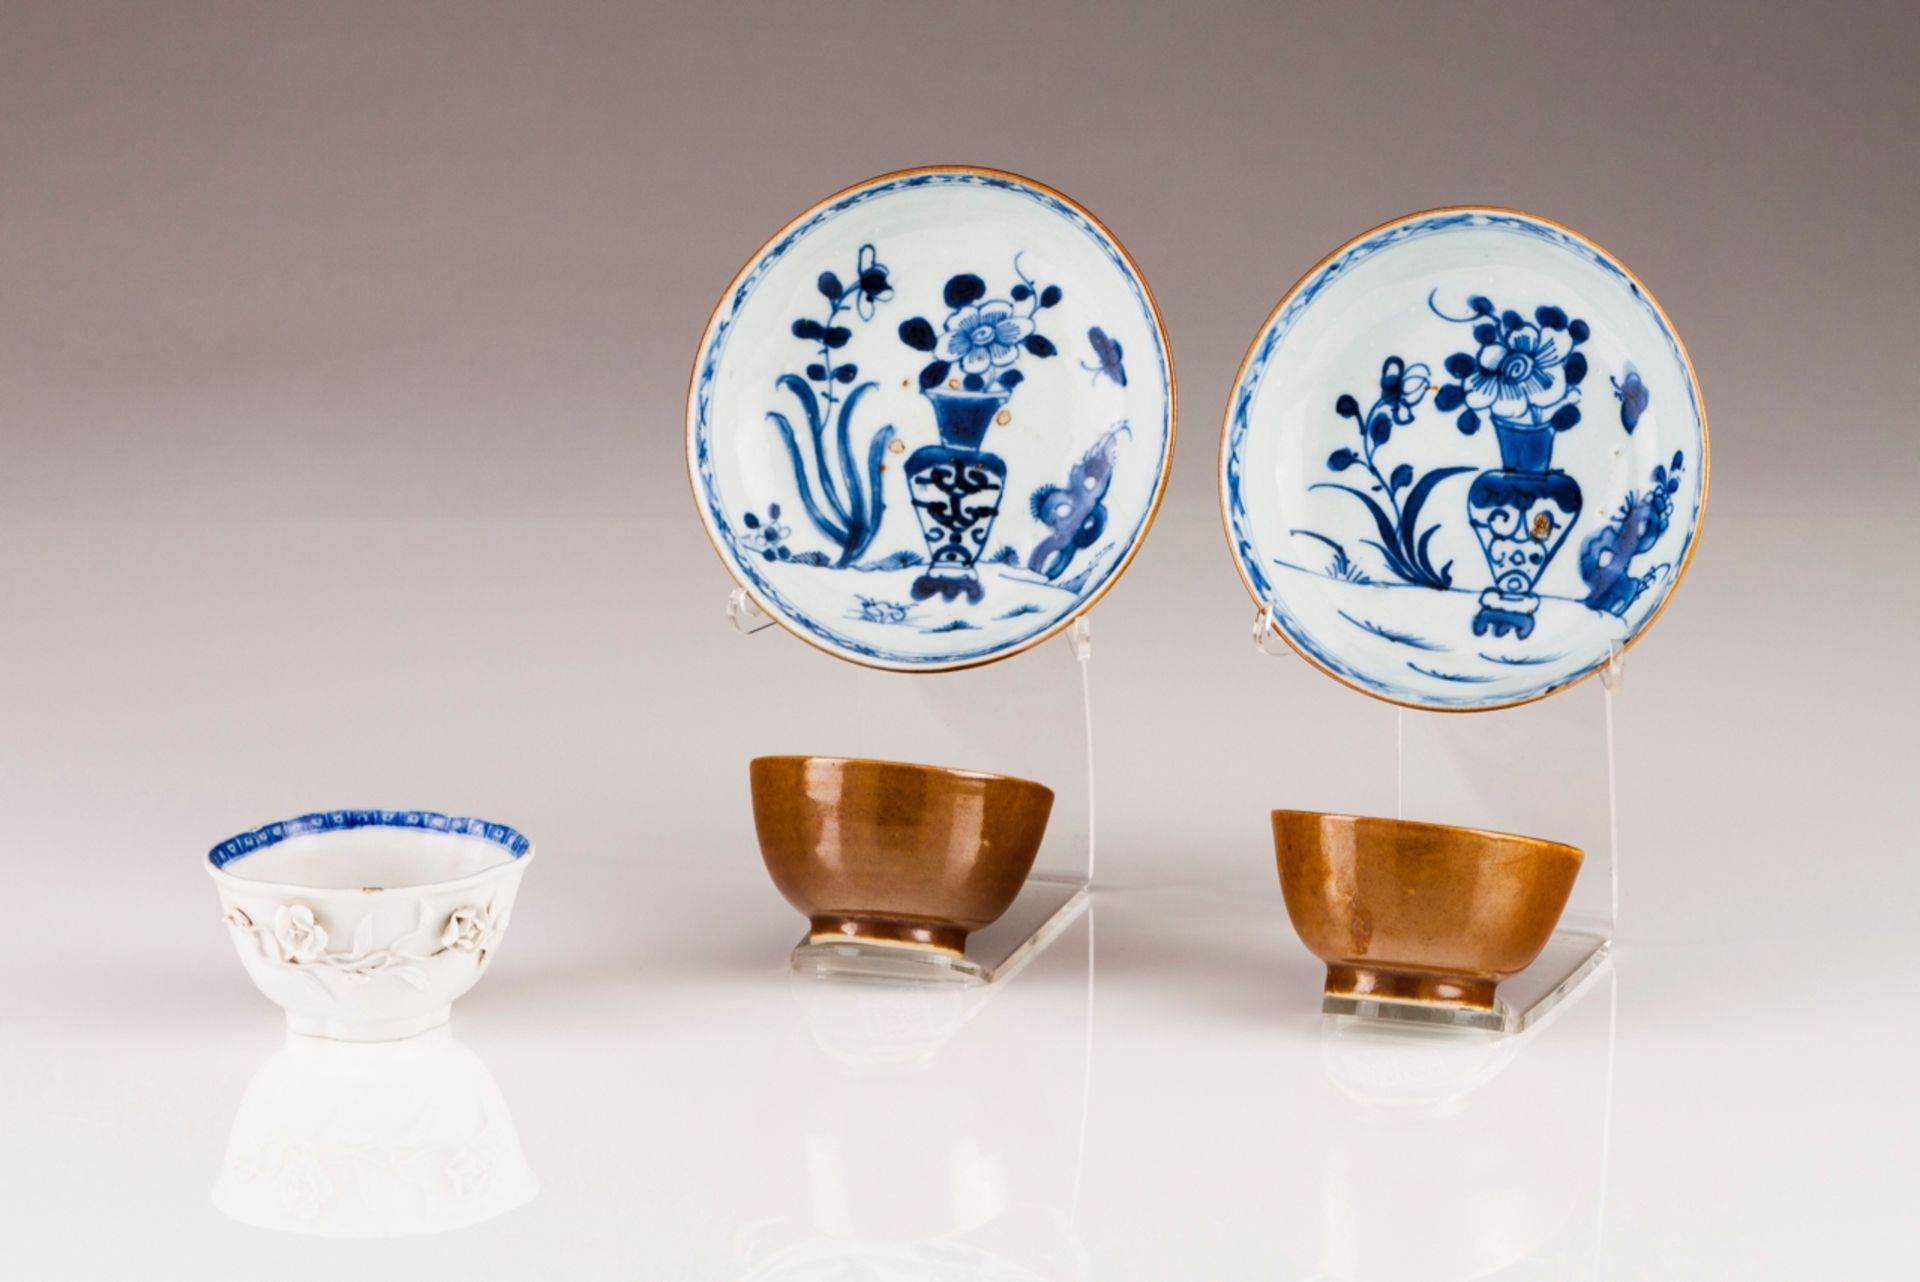 A pair of Qianlong cups and saucers
Chinese export porcelain
Chocolate decoration with blue and